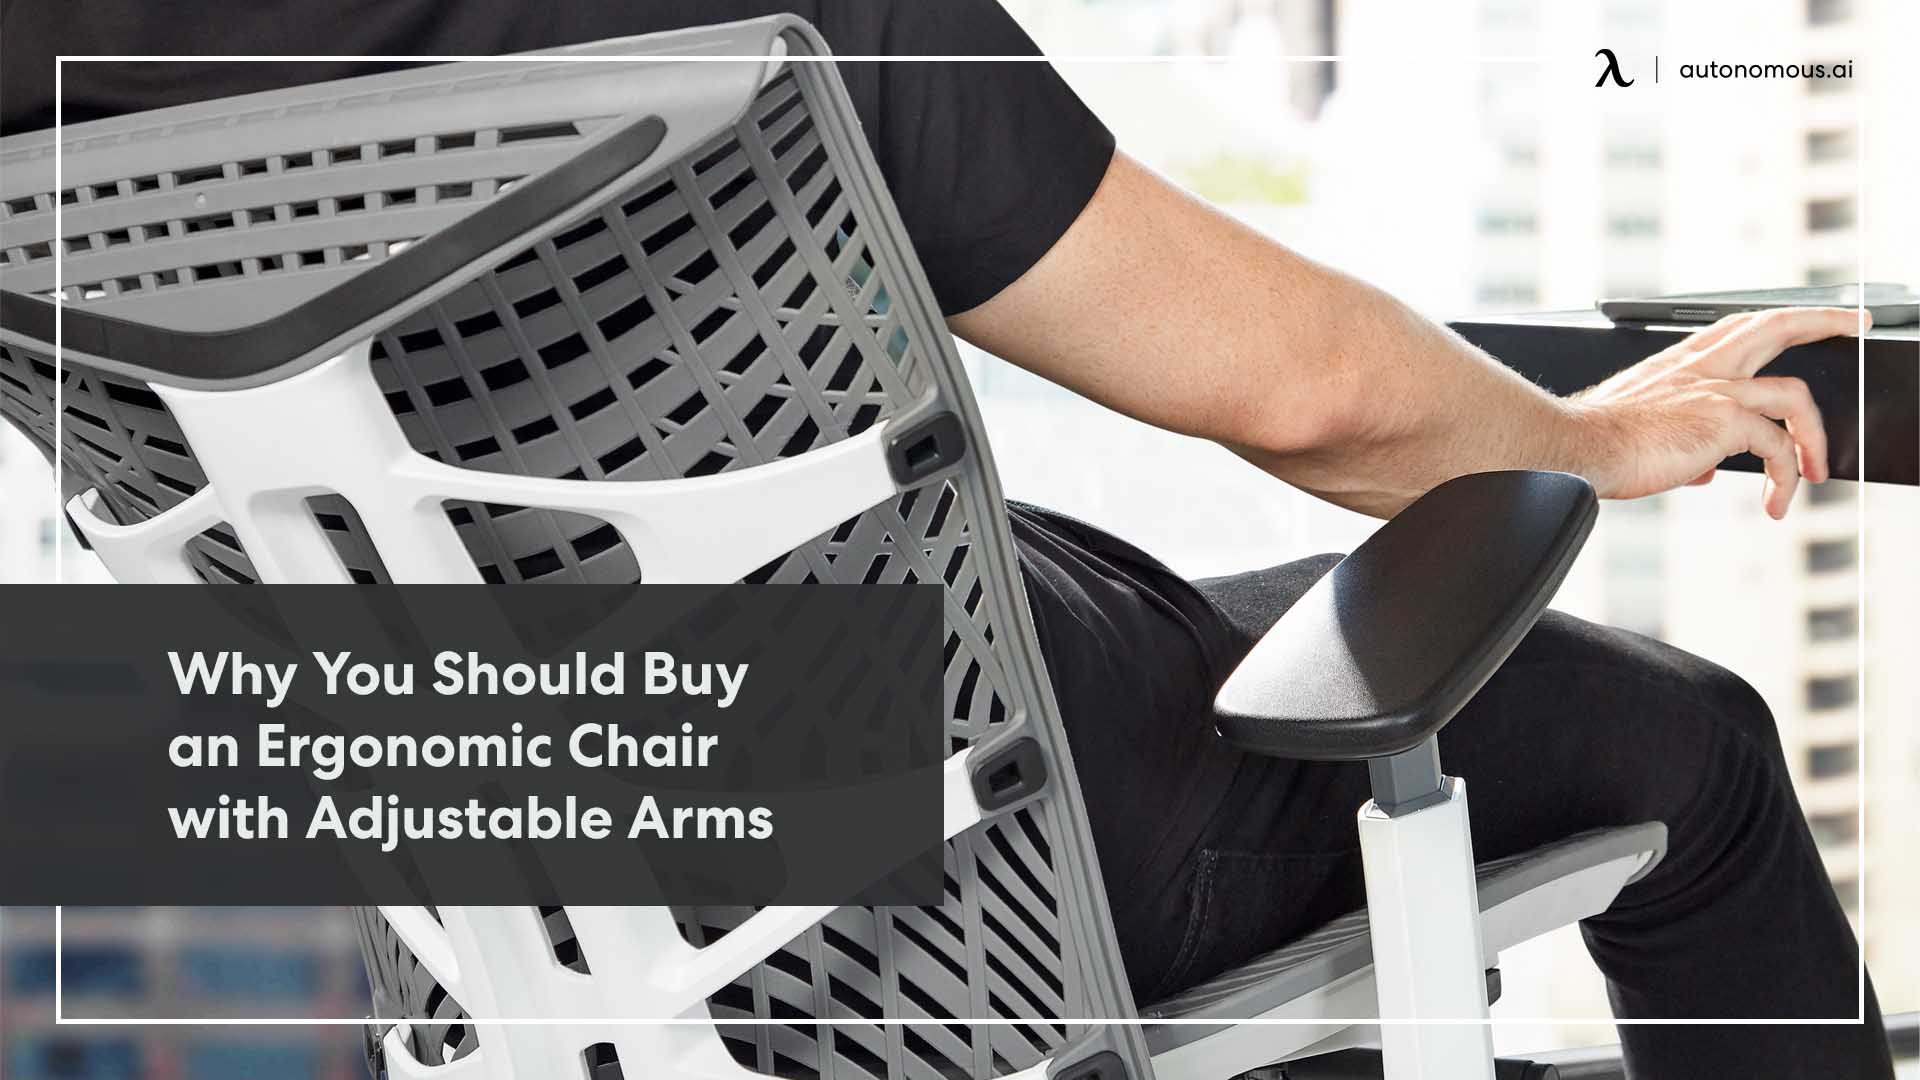 Why You Should Buy an Ergonomic Chair with Adjustable Arms